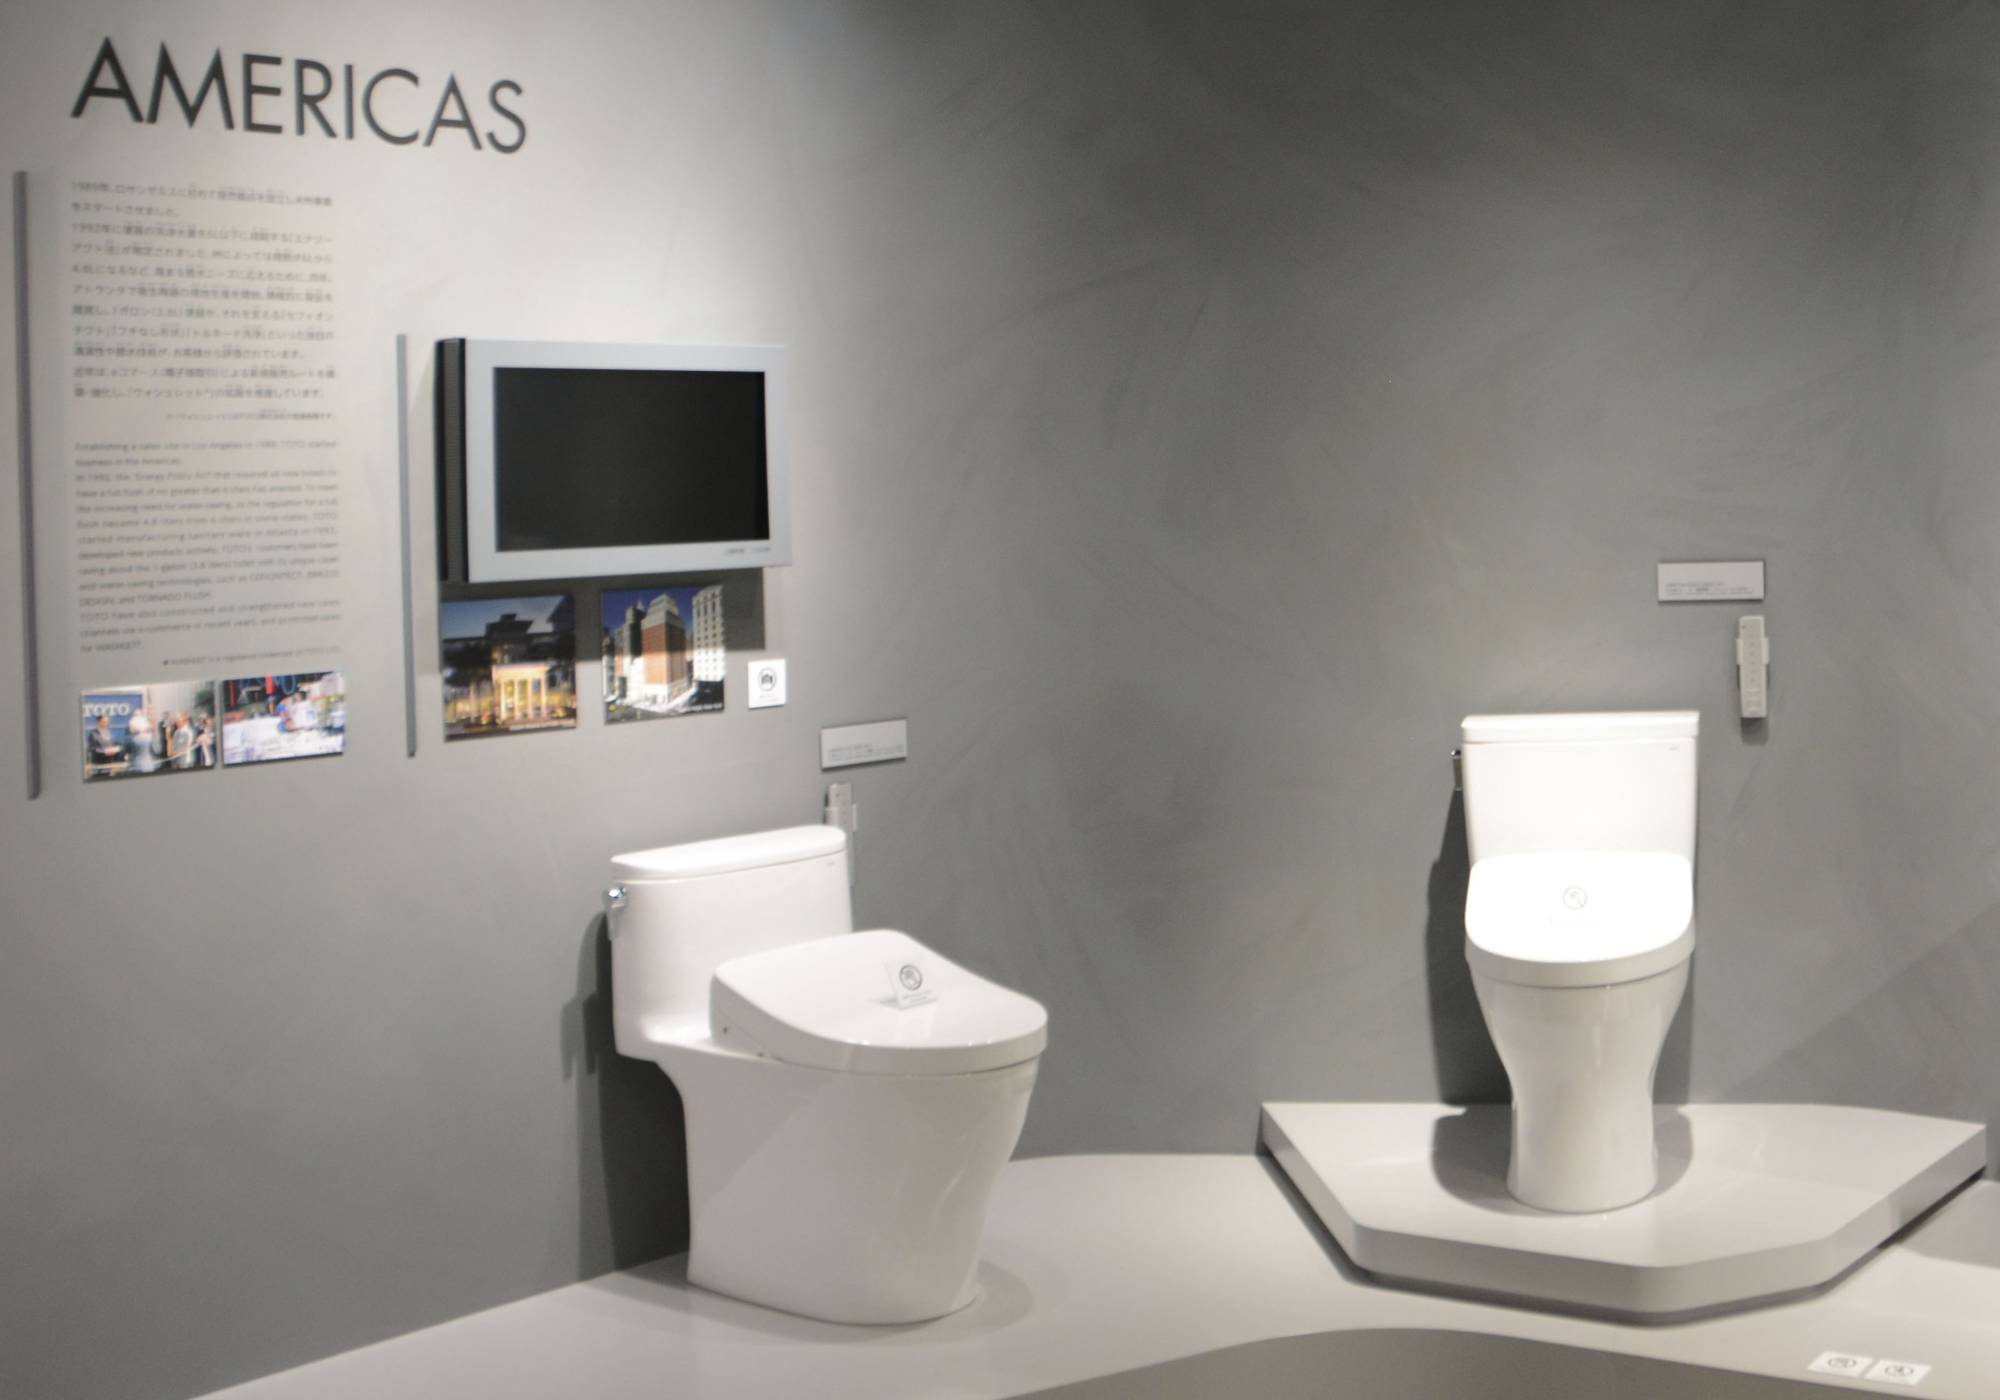 Toto's electronic bidet toilets on display in the United States | KYODO